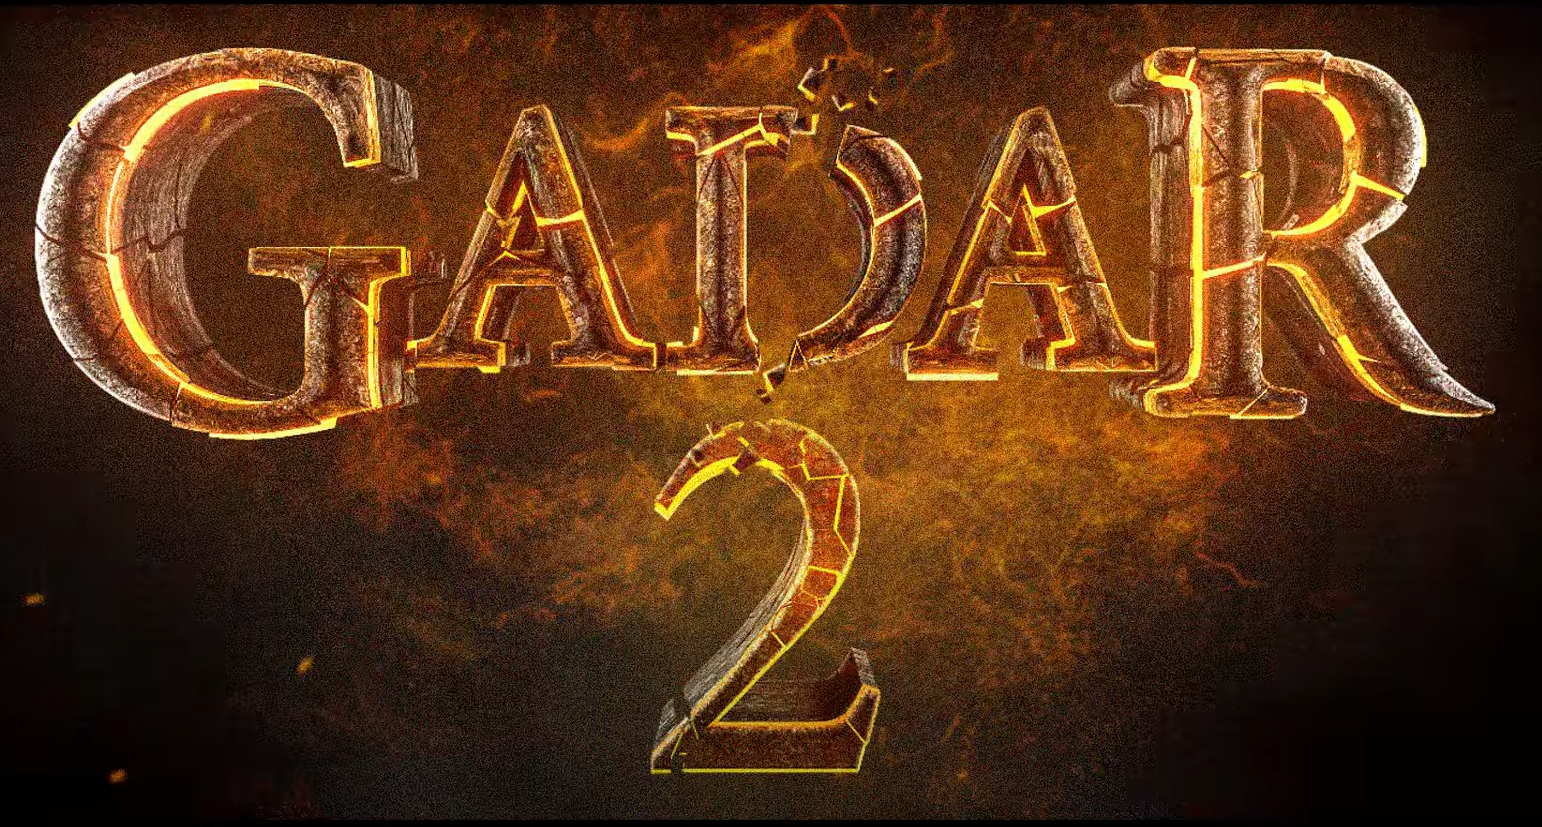 You are currently viewing Gadar2